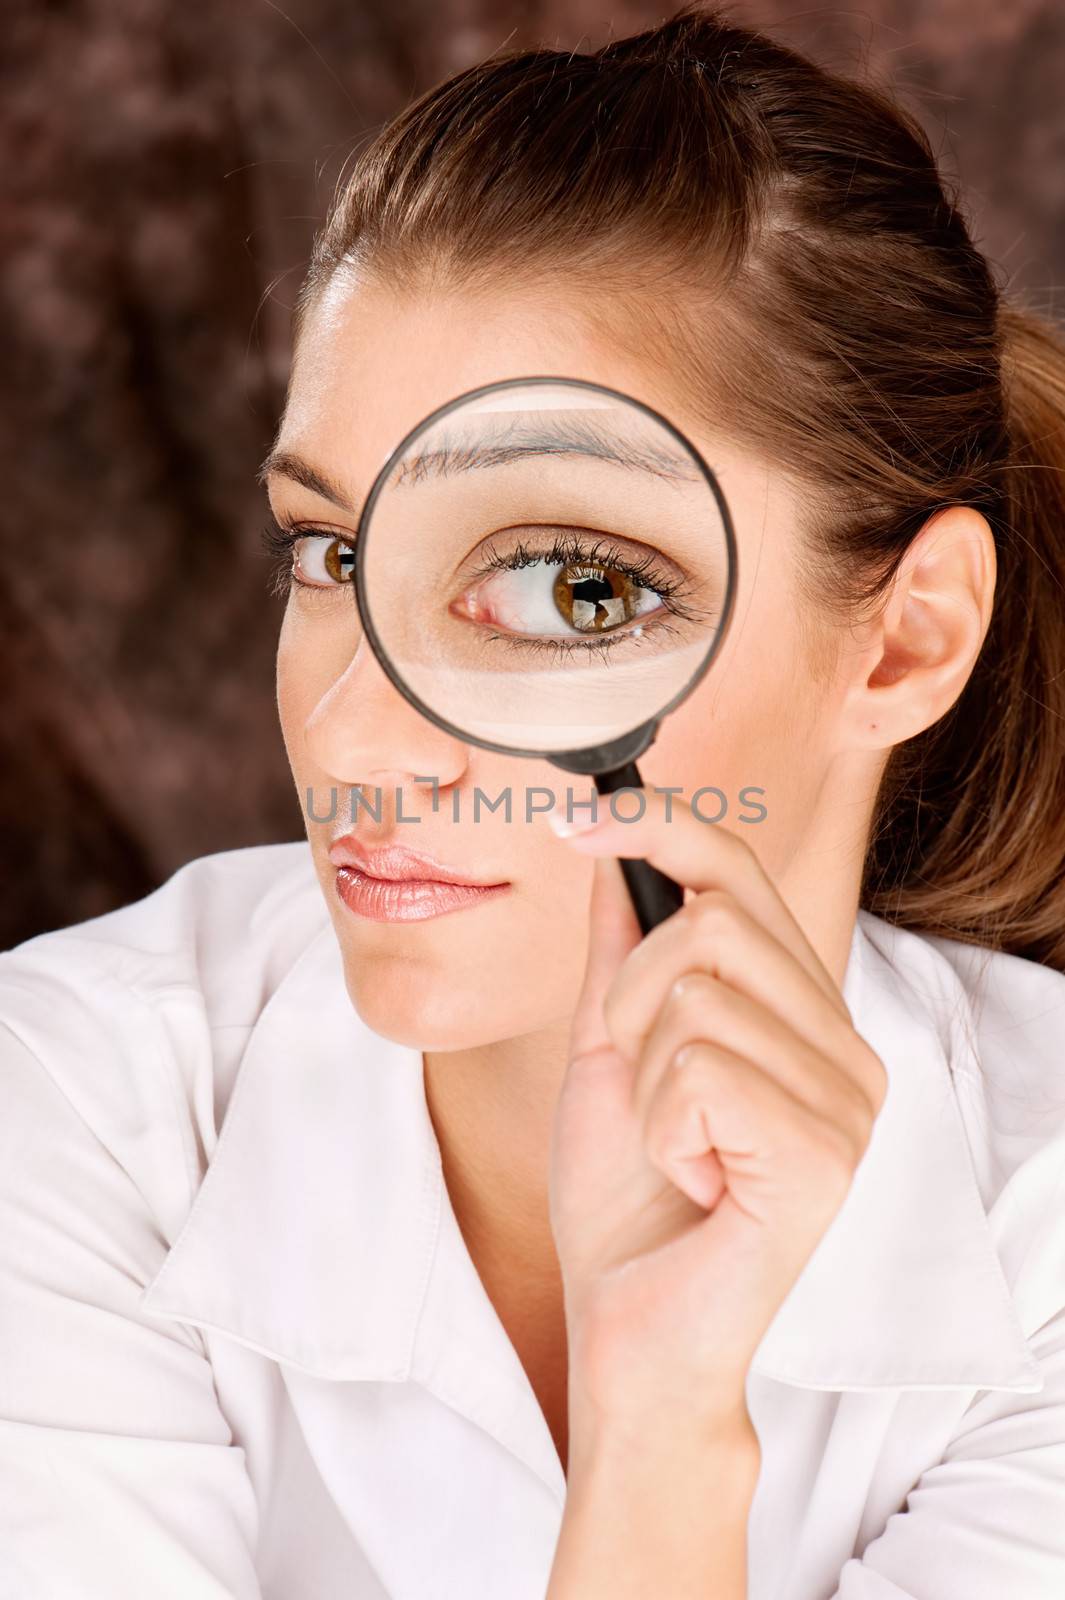 researcher looking through magnifier glass by imarin